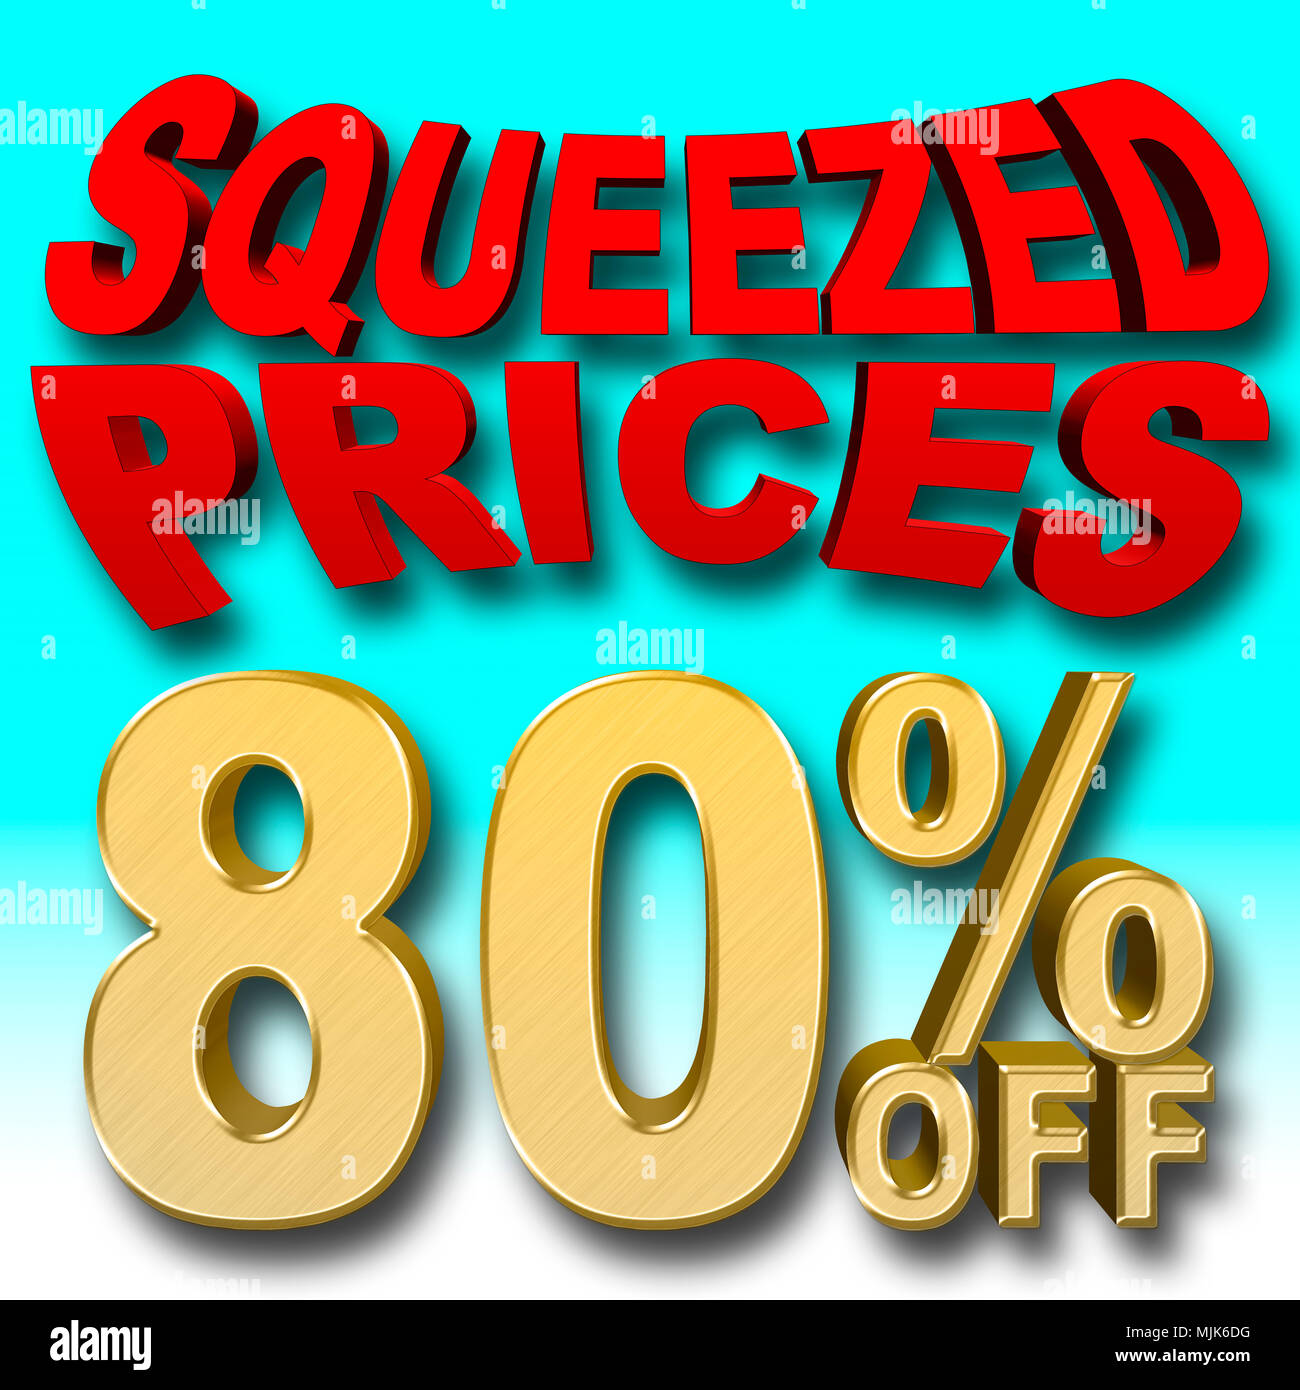 Stock Illustration - Golden Text: 80 Percentage Off, Red Text: Squeezed Prices, 3D Illustration, Blue Gradient Background, Different. Stock Photo